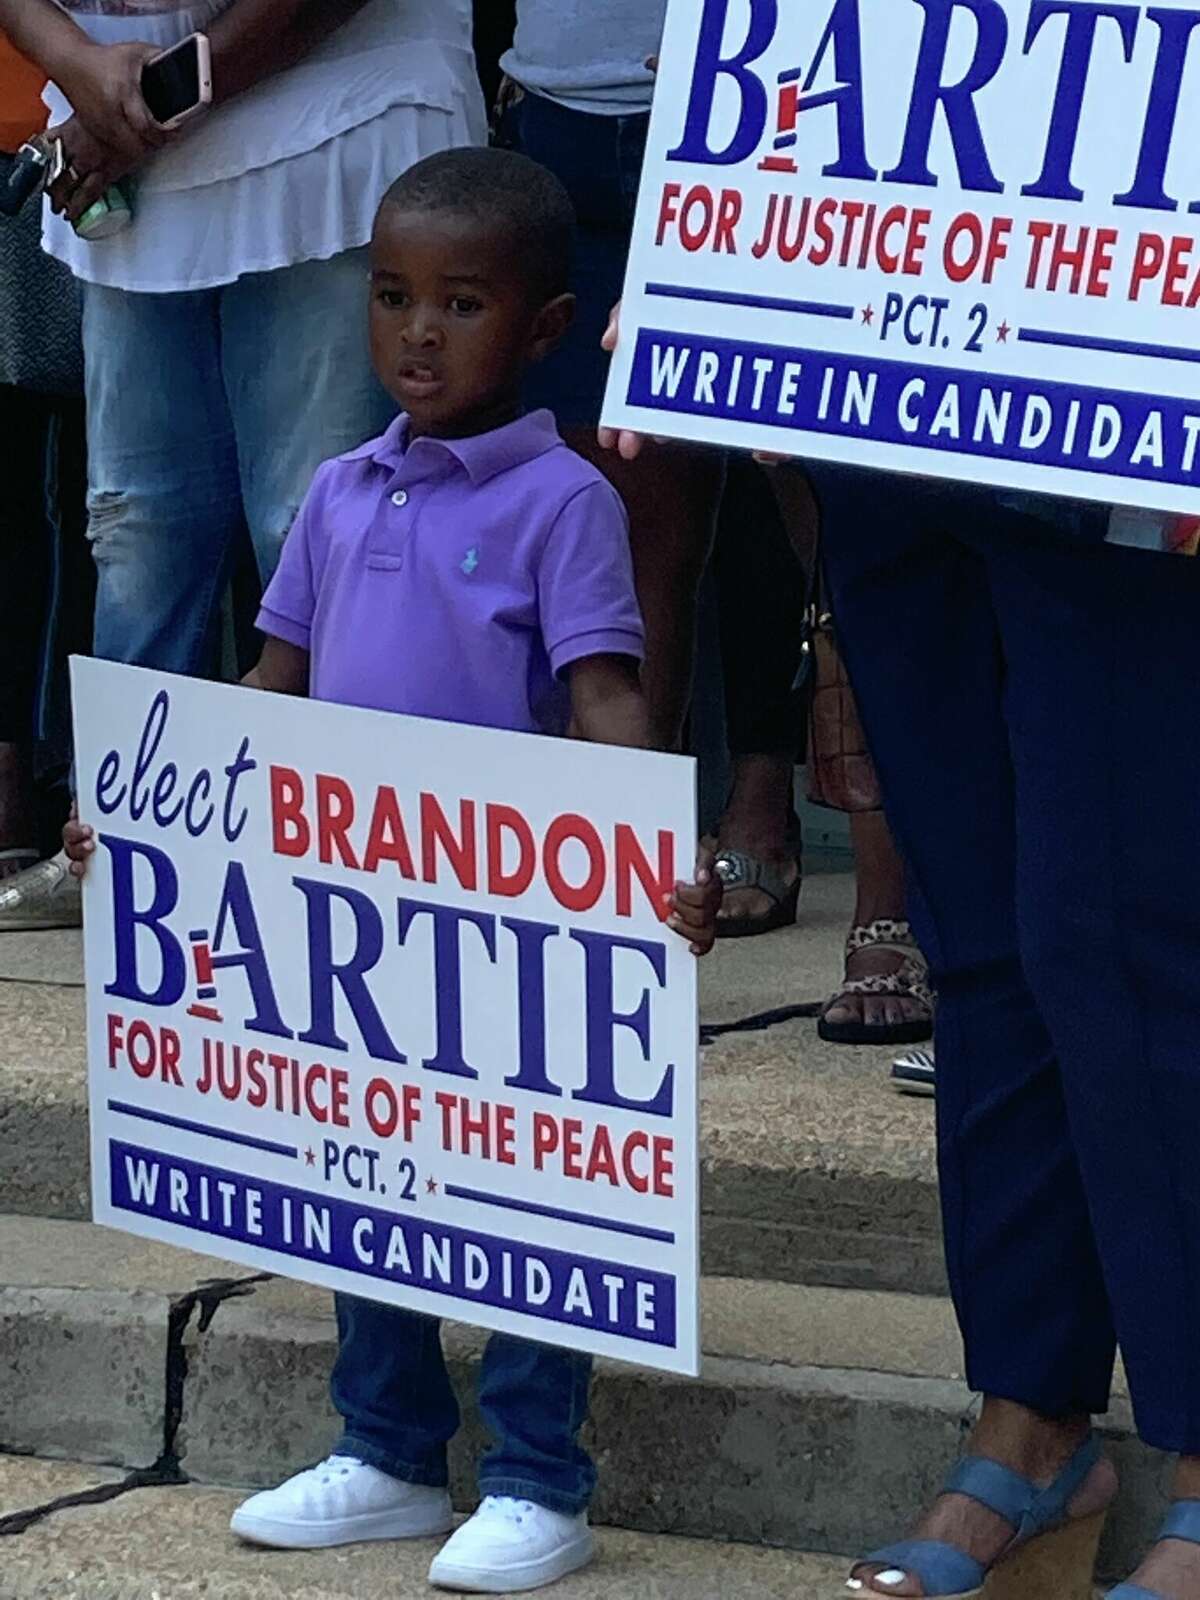 Brendan Bartie, son of candidate Brandon Bartie, holds signs for his father's campaign at press conference.